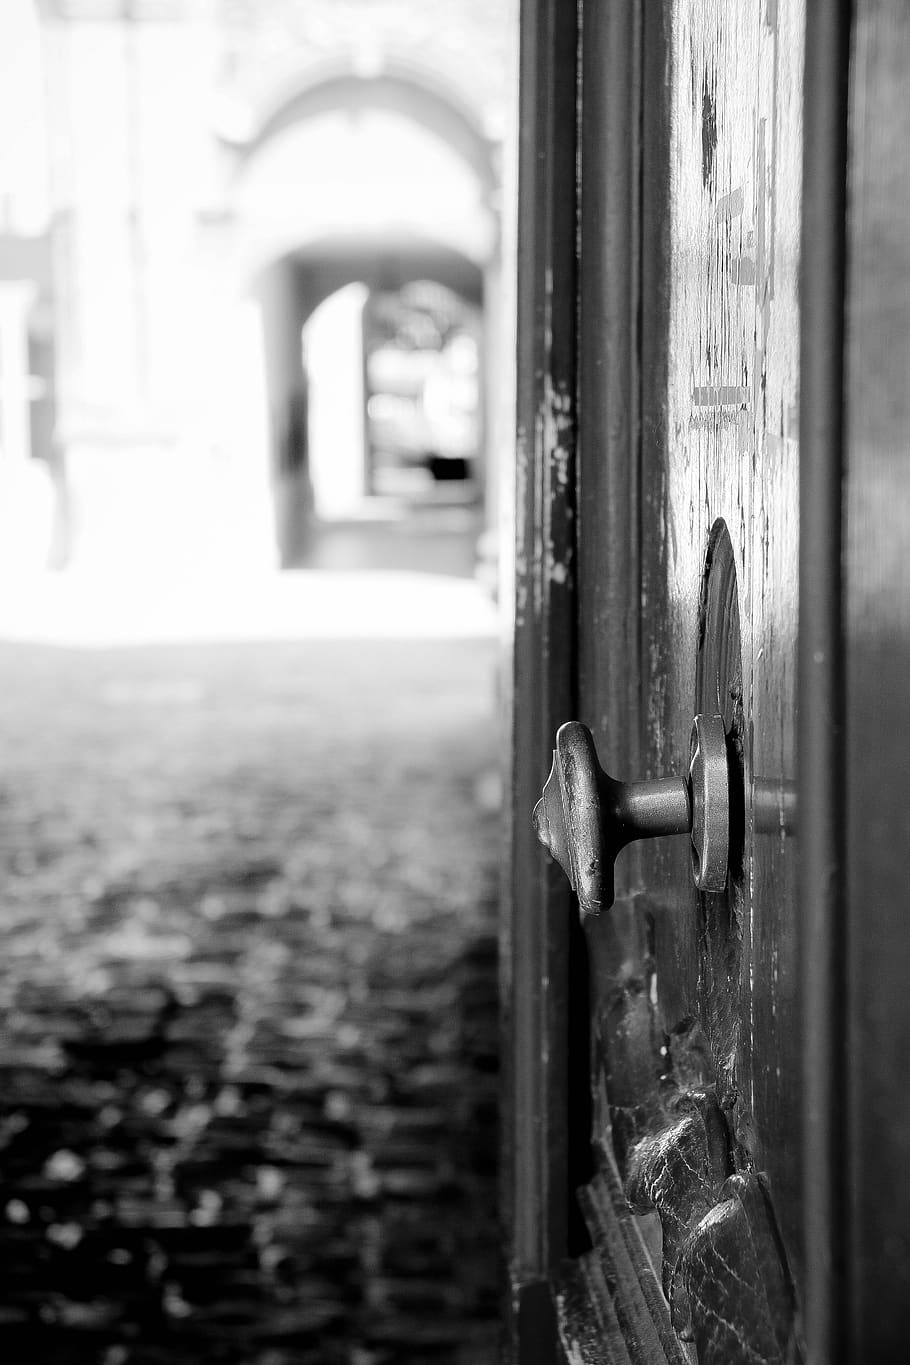 door, open, lane, paved, former, black-and-white, entry, choice, old, architecture